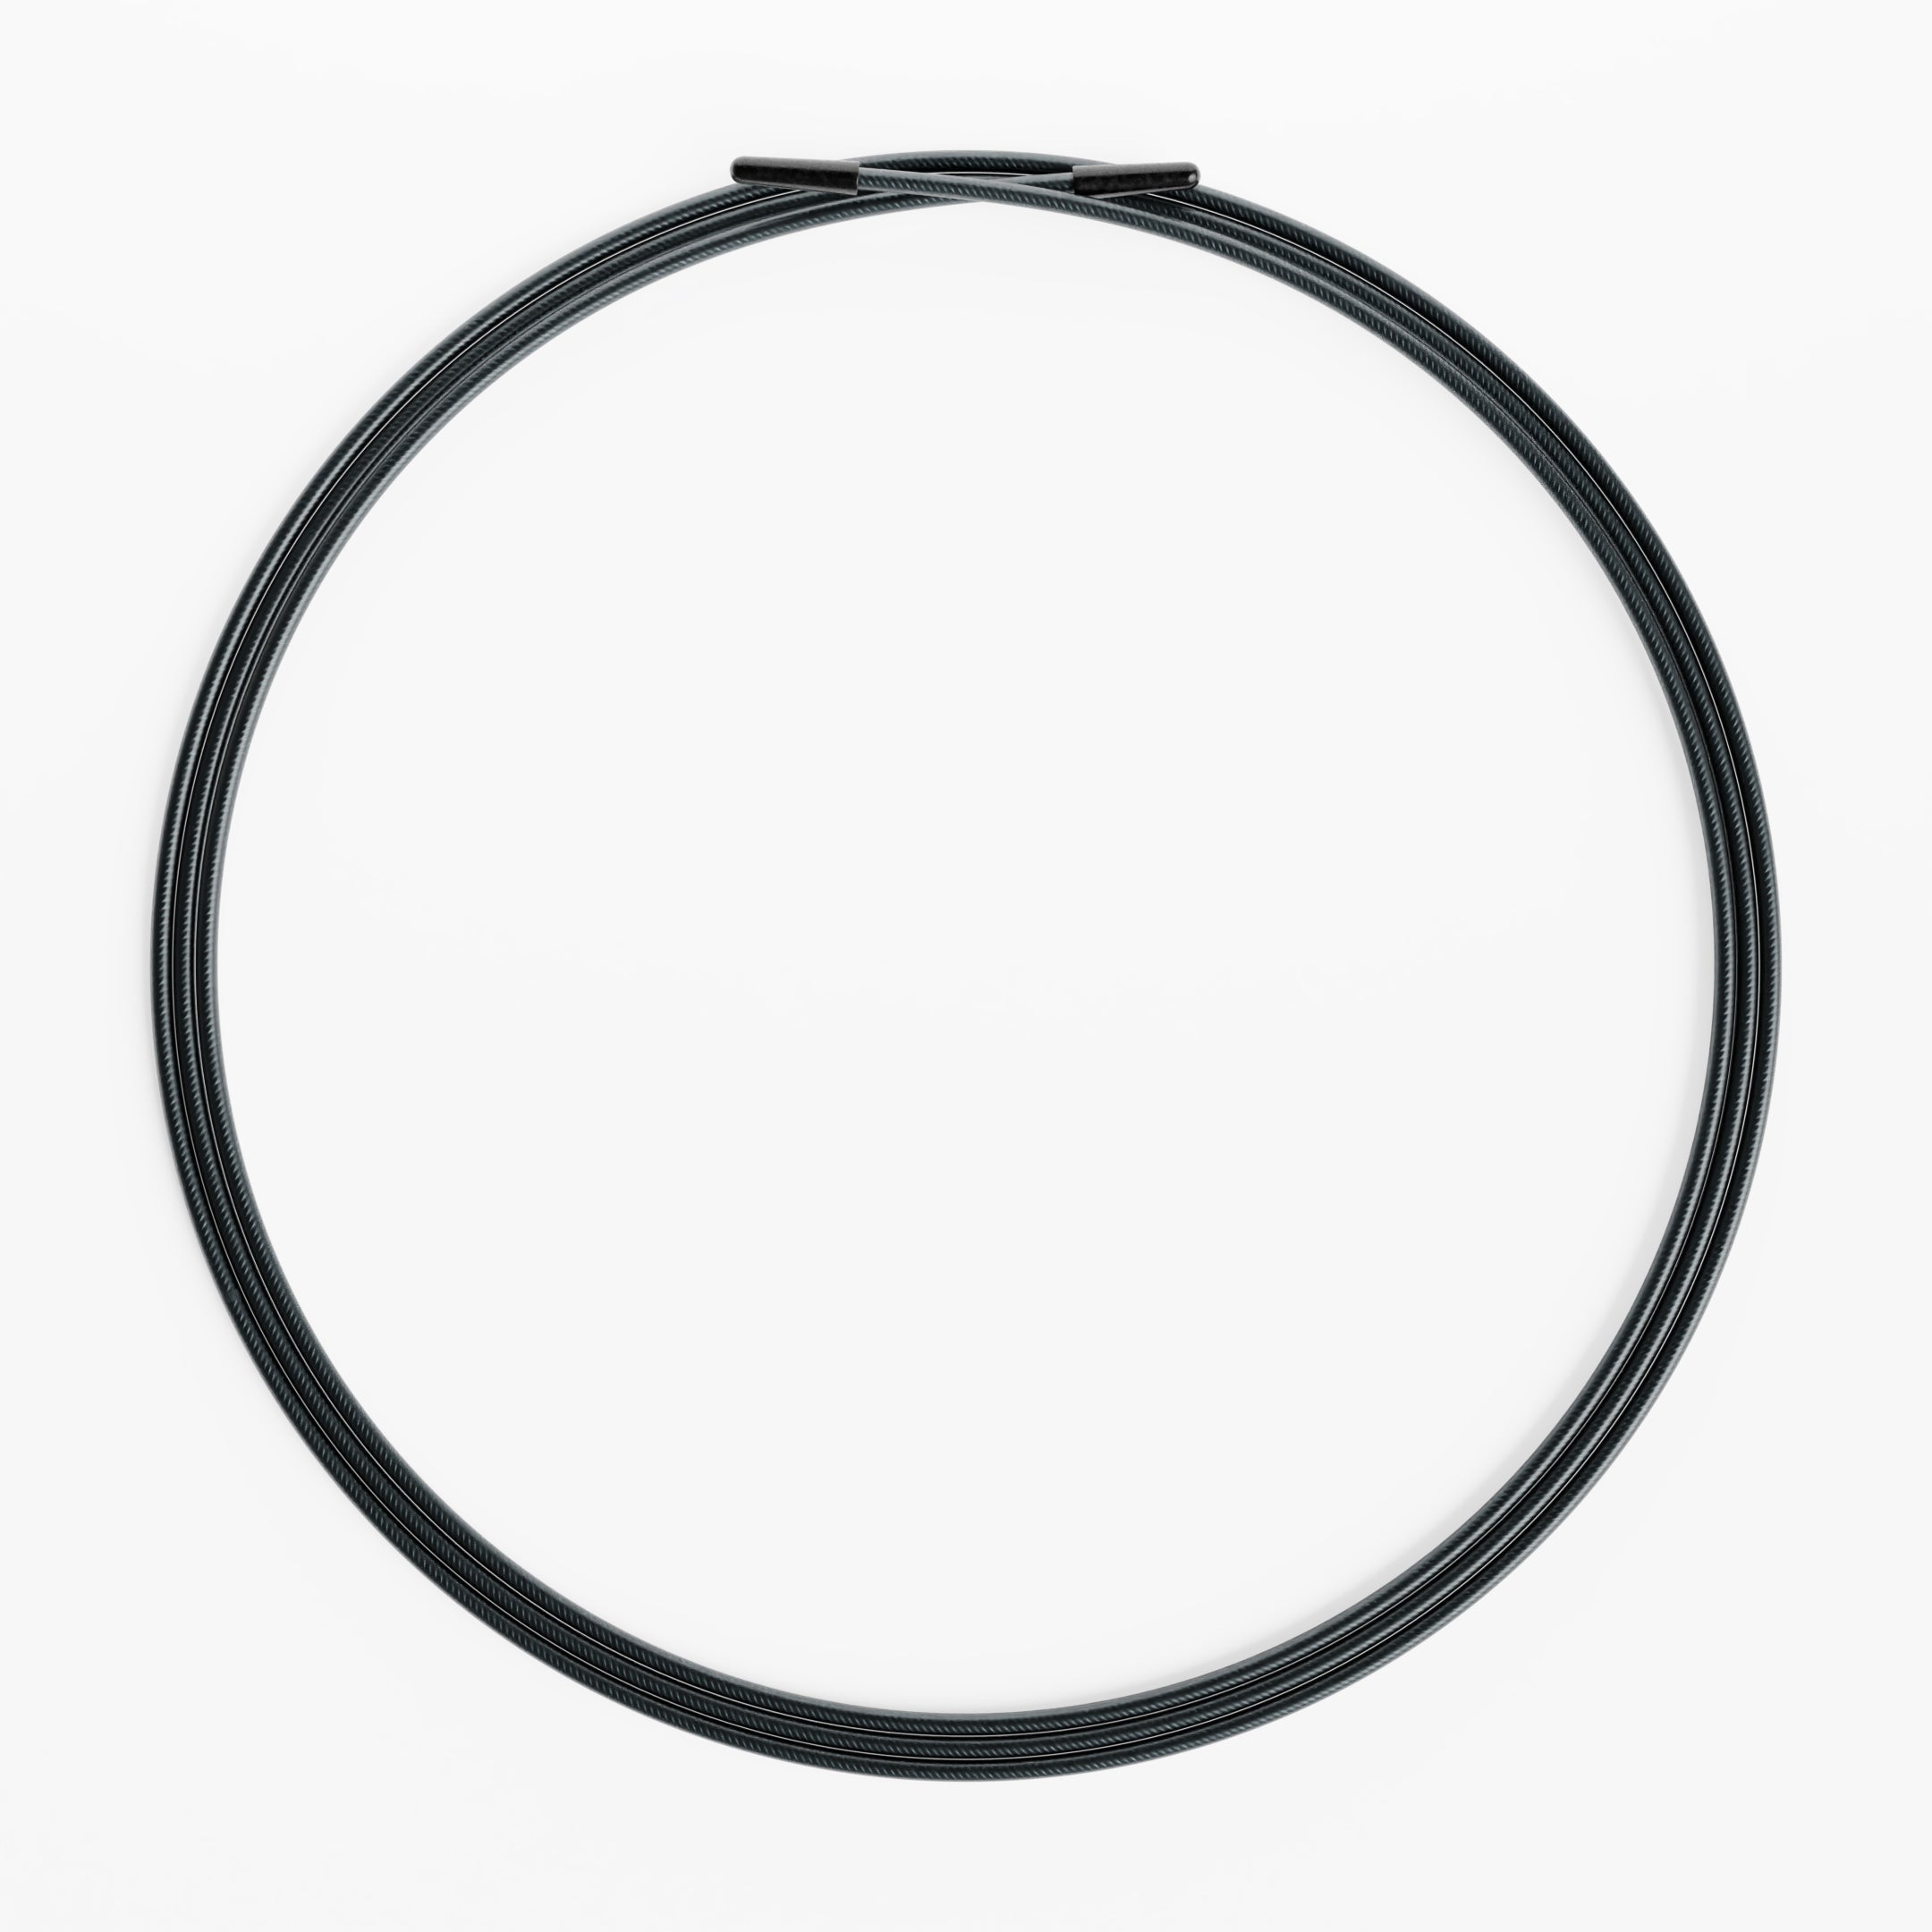 Arox - 2.0 mm pvc coated wire